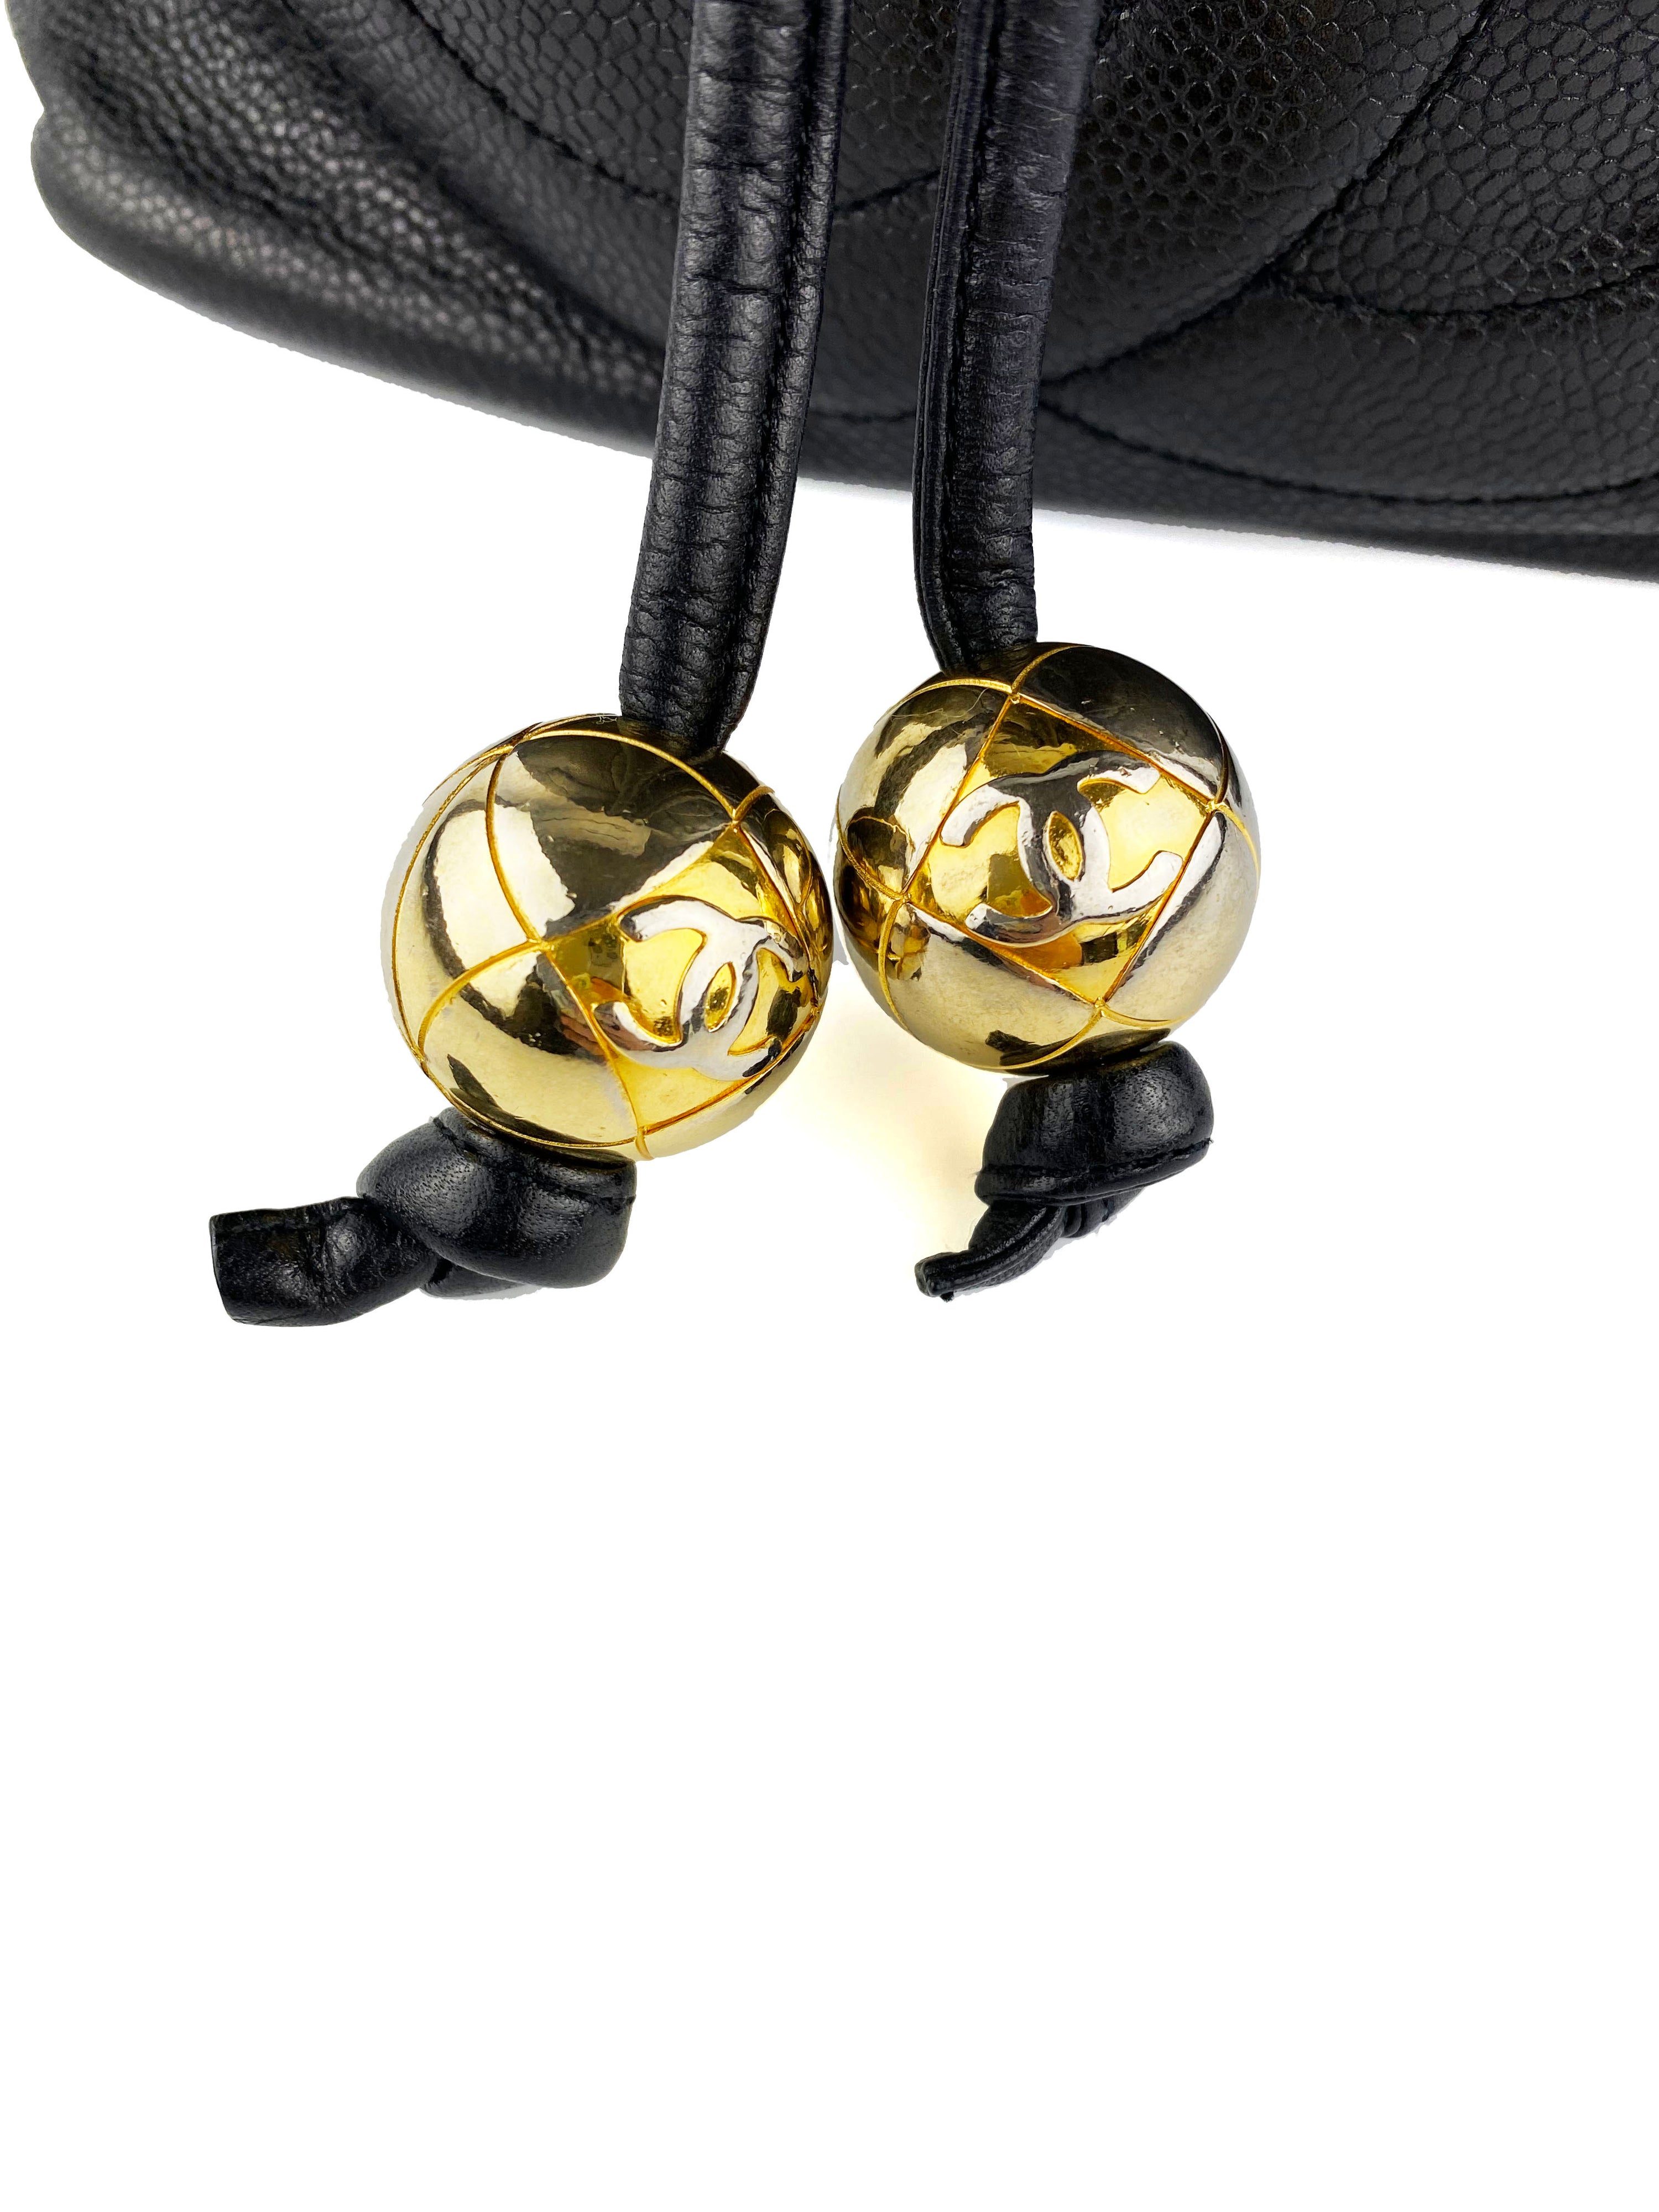 Chanel Vintage Drawstring Bucket Bag with Gold Baubles